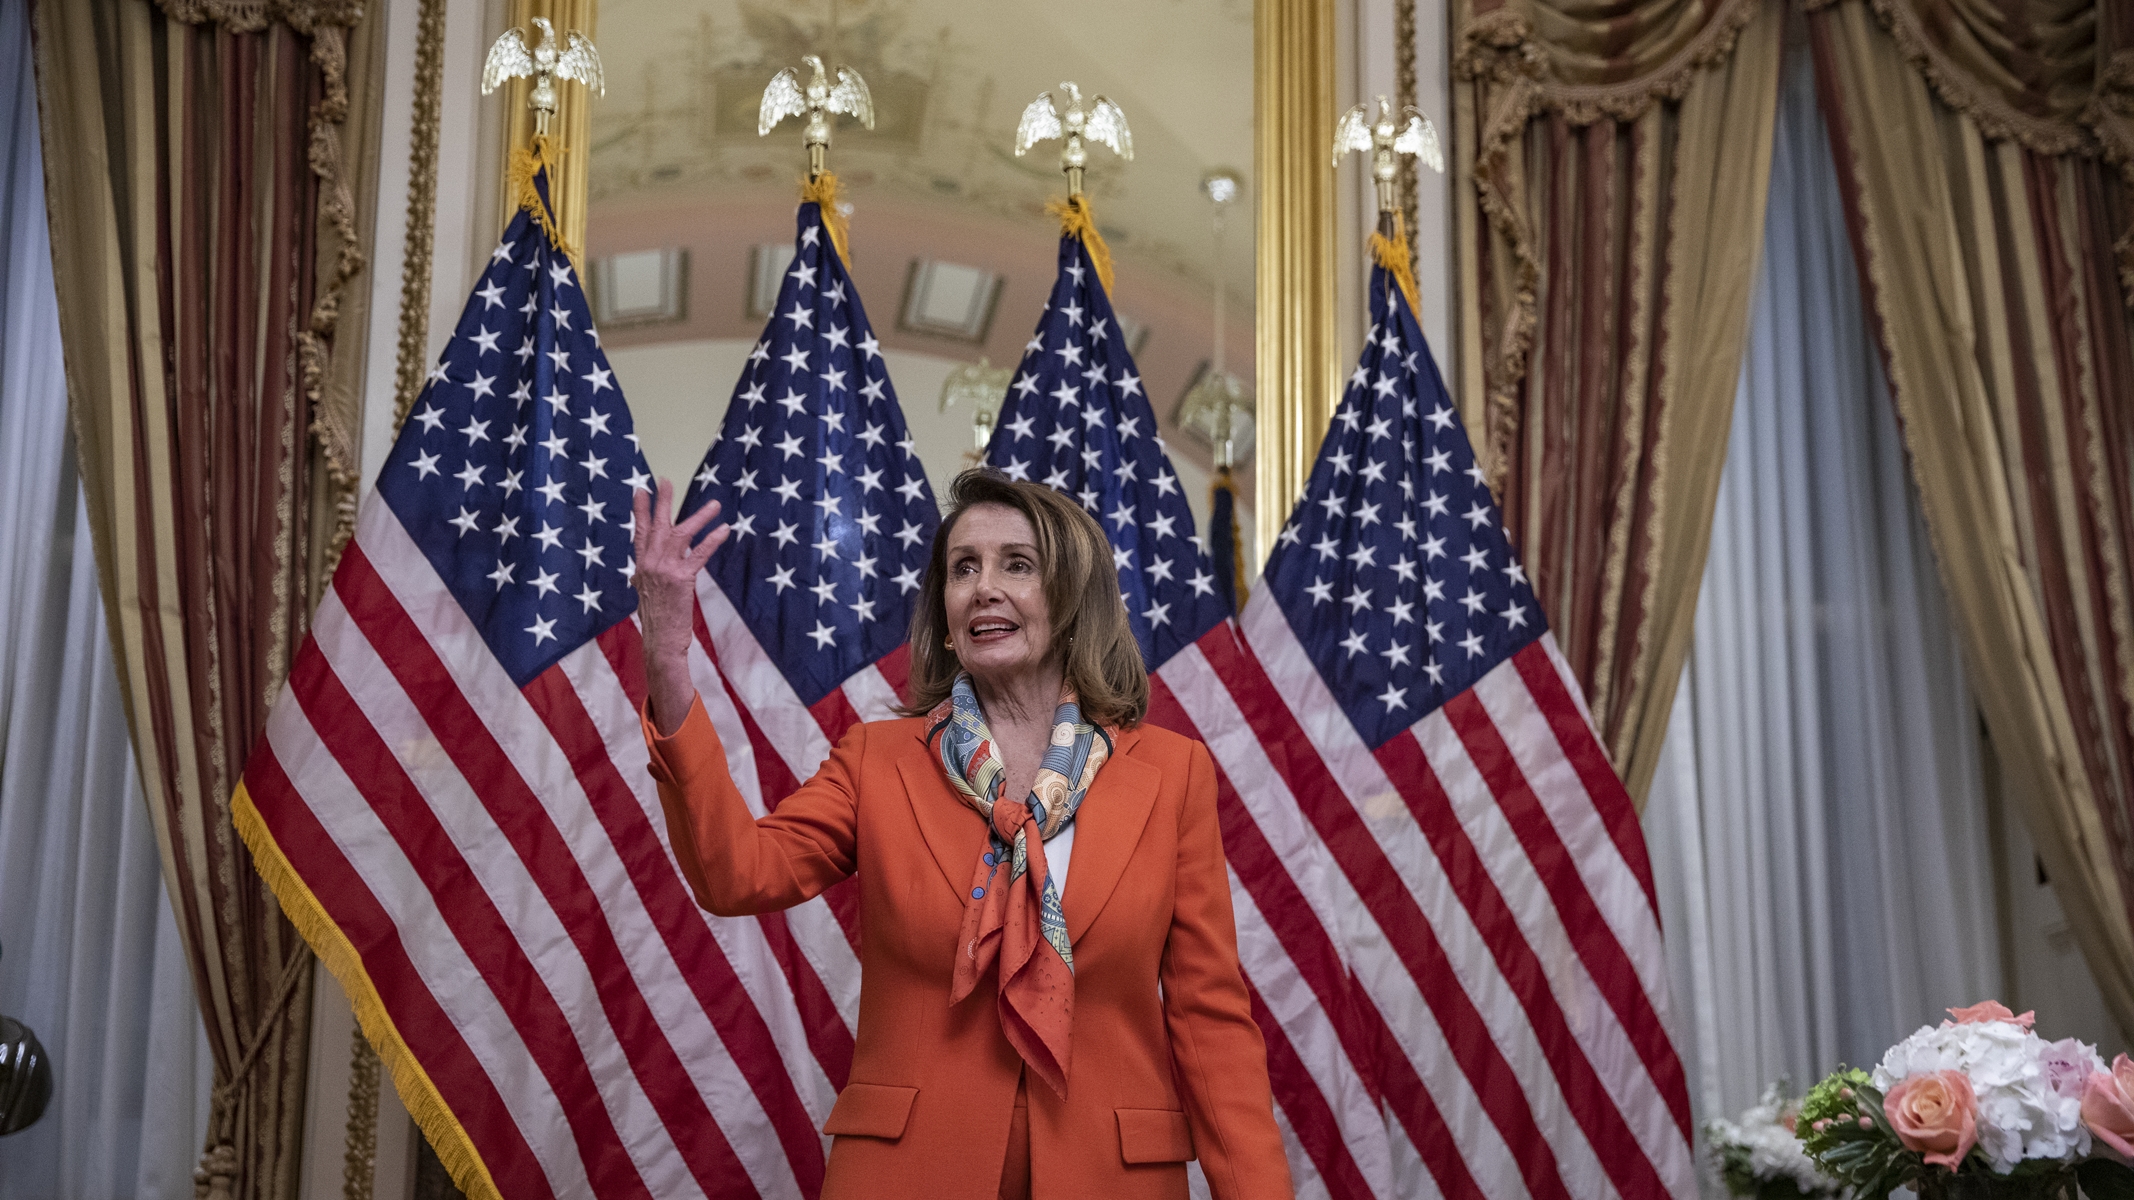 Nancy Pelosi Is Becoming Increasingly Isolated Over Her Opposition to Impeaching Trump